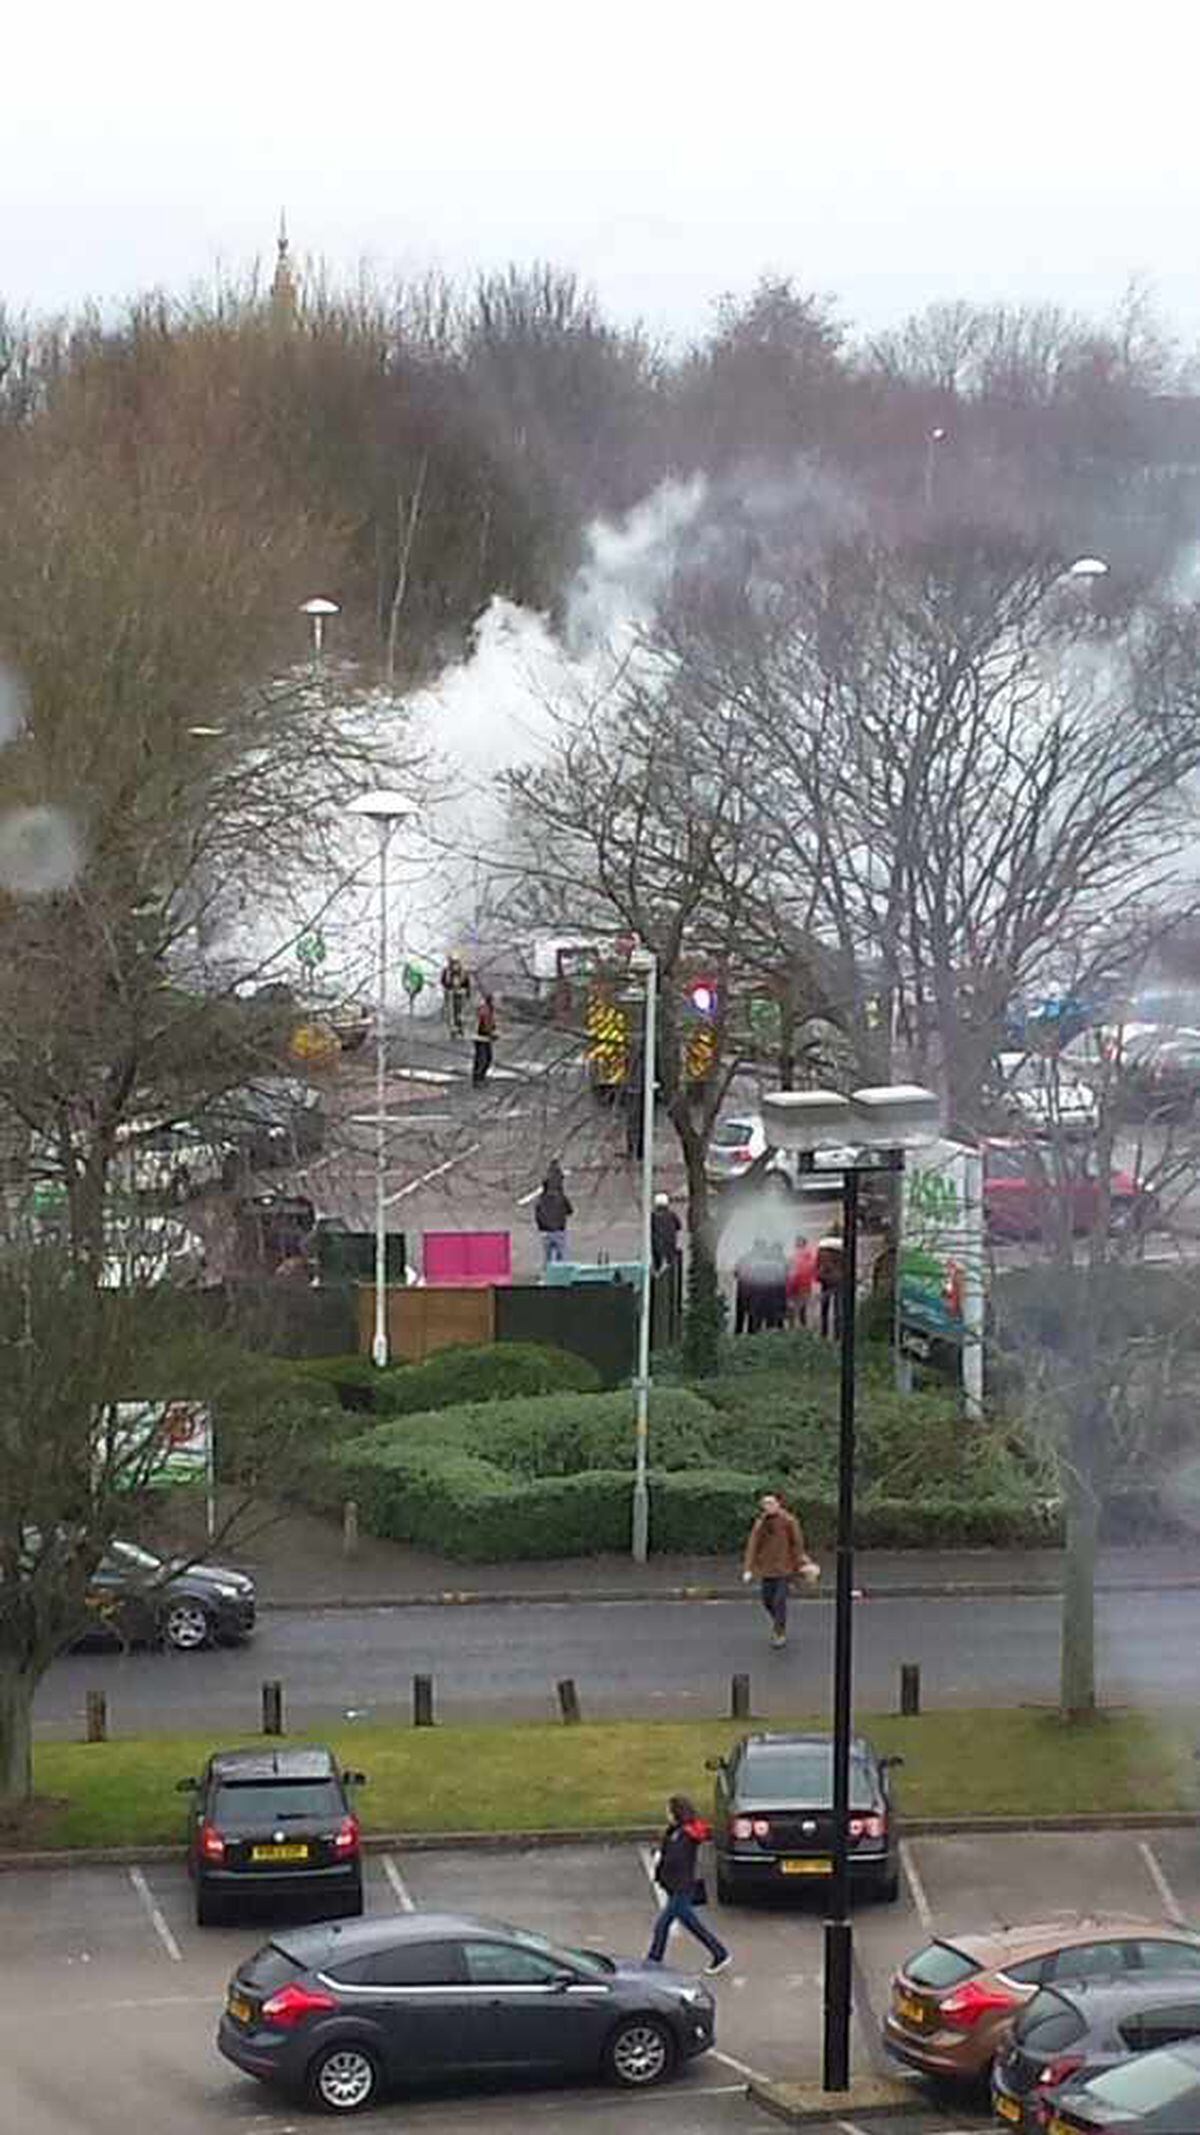 Firefighters extinguish the blaze, picture: @louiise72